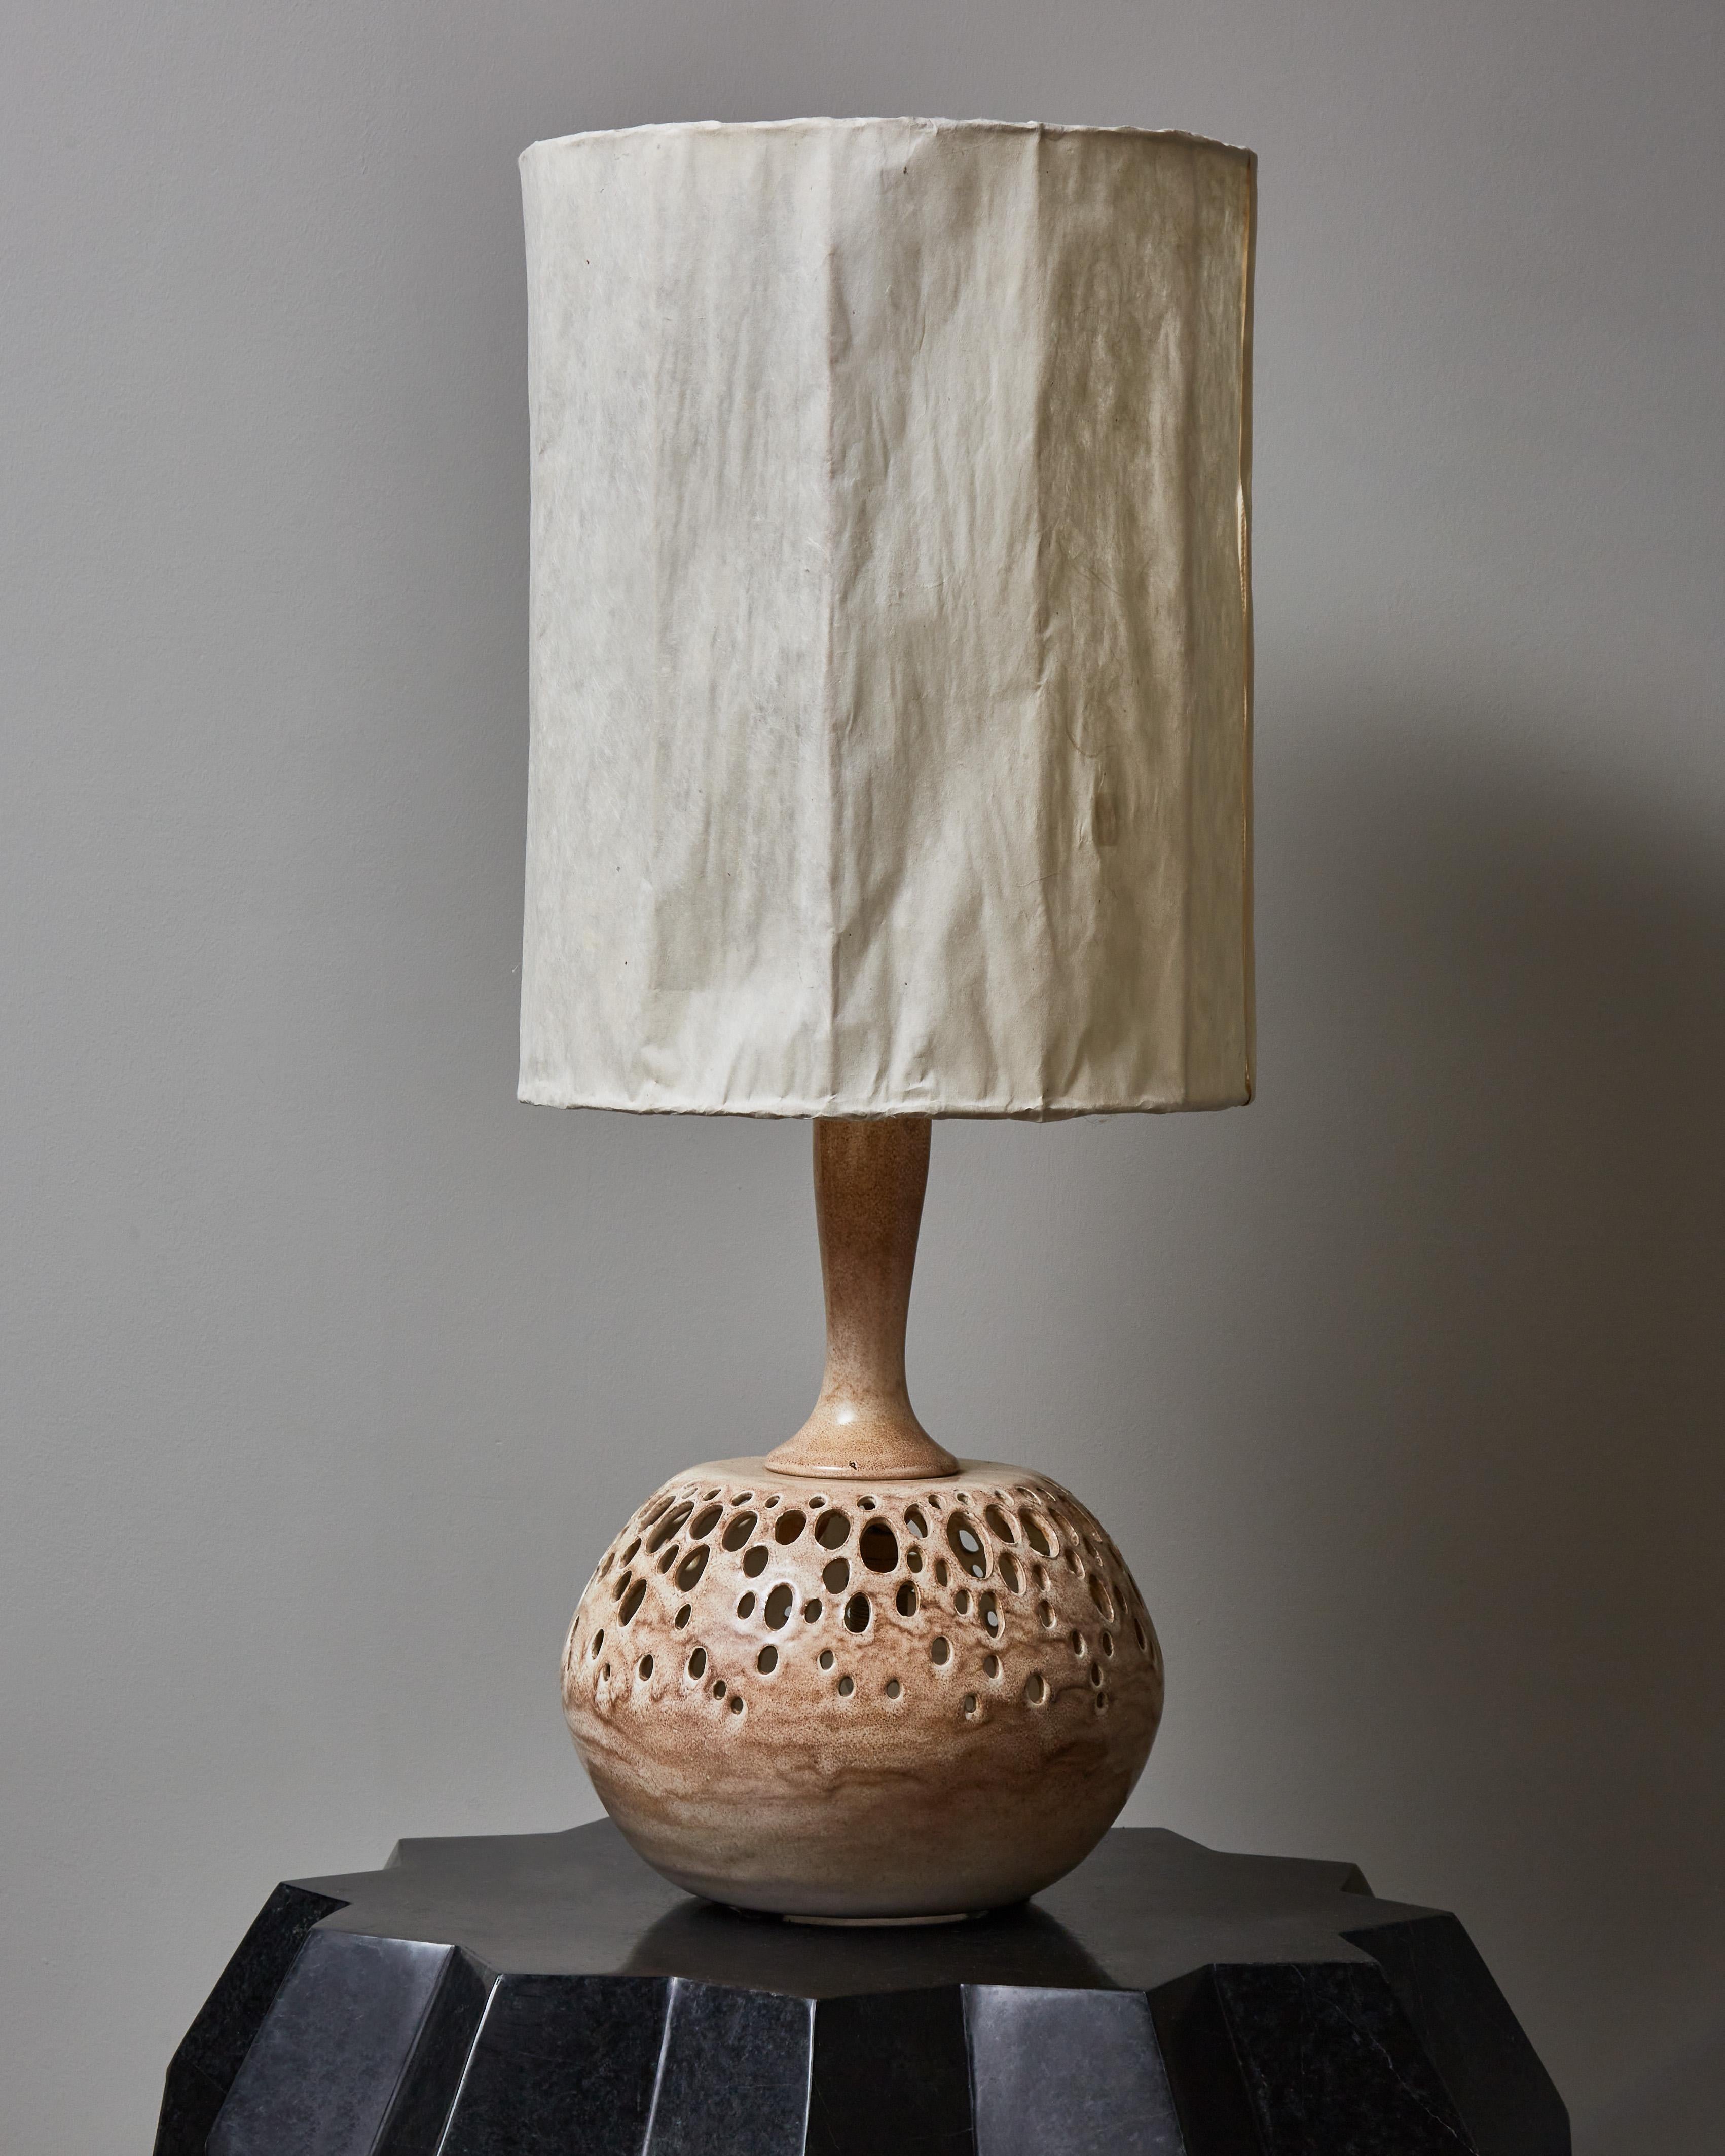 Glazed ceramic table lamp in beautiful tones of light beige and brown with openwork motifs from where light is defused. It comes with its original rice paper shade and is signed with an unidentified monotype “IS” on the bottom of the base.